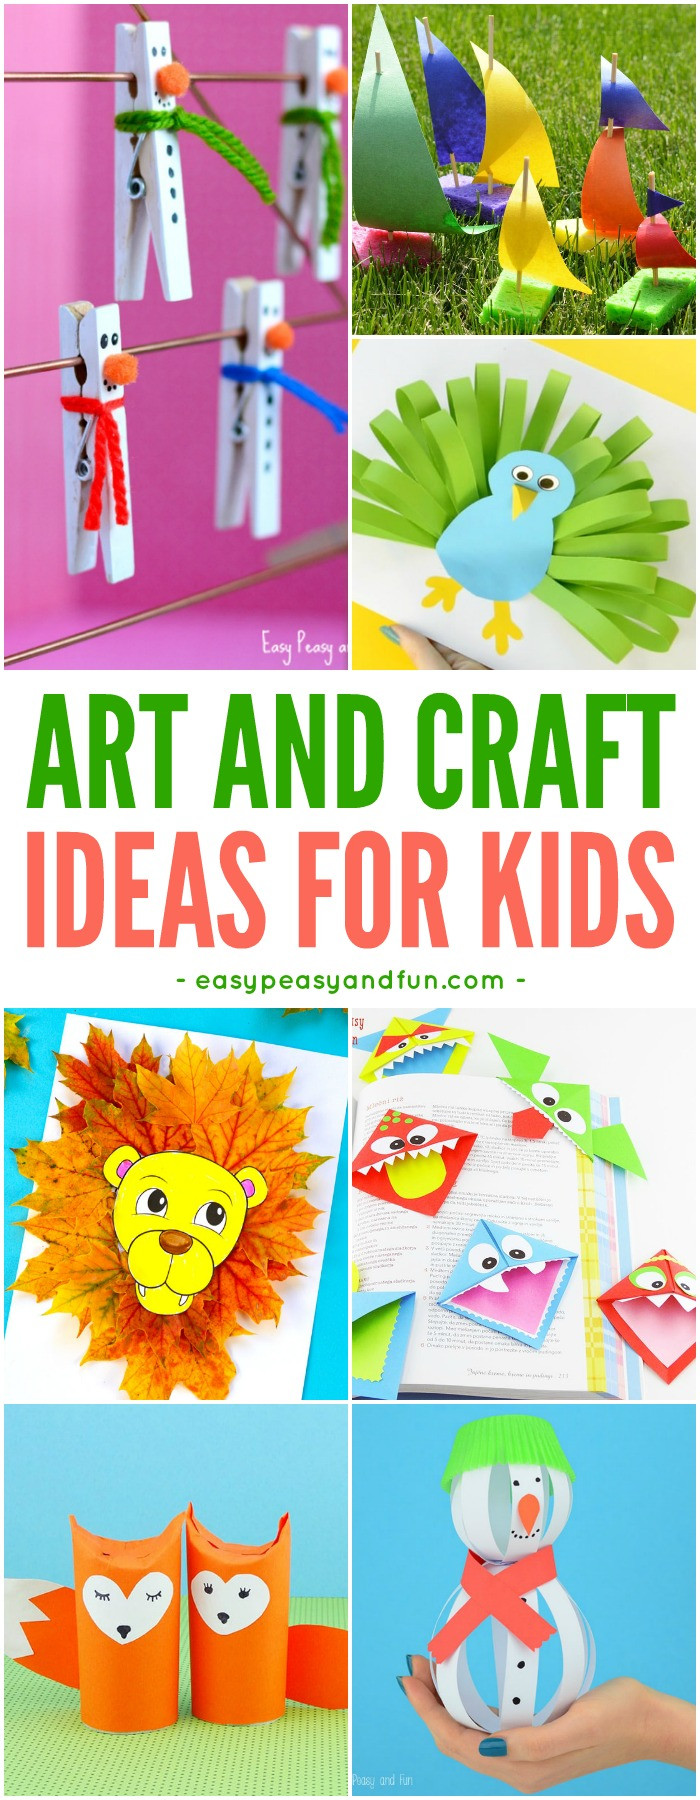 Art And Craft Ideas For Toddlers
 Crafts For Kids Tons of Art and Craft Ideas for Kids to